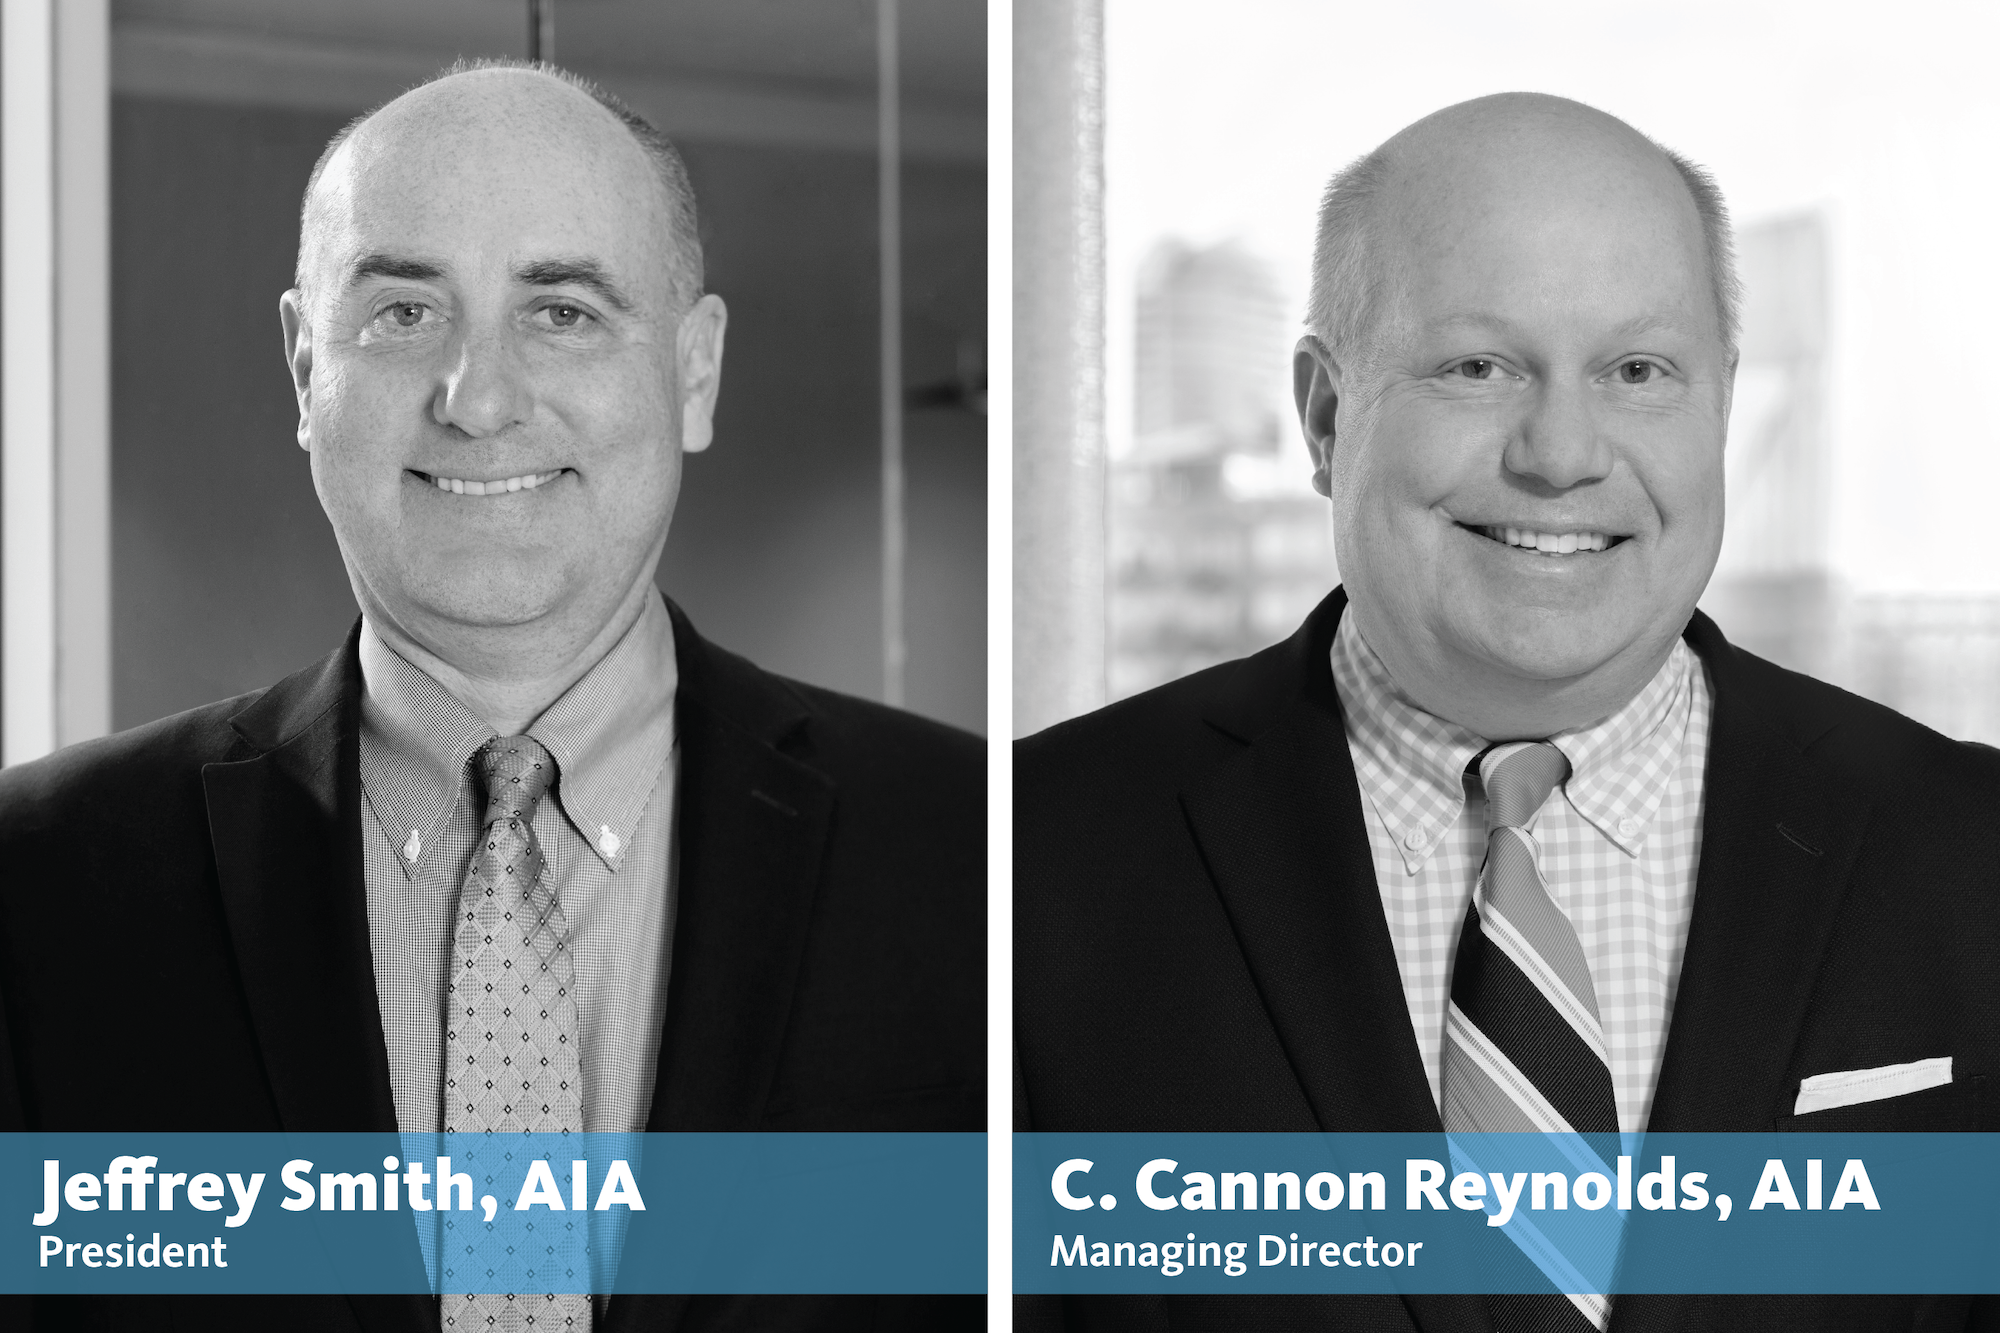 Niles Bolton Associates promotes Jeffrey Smith, AIA, to President and C. Cannon Reynolds, AIA, to Managing Director